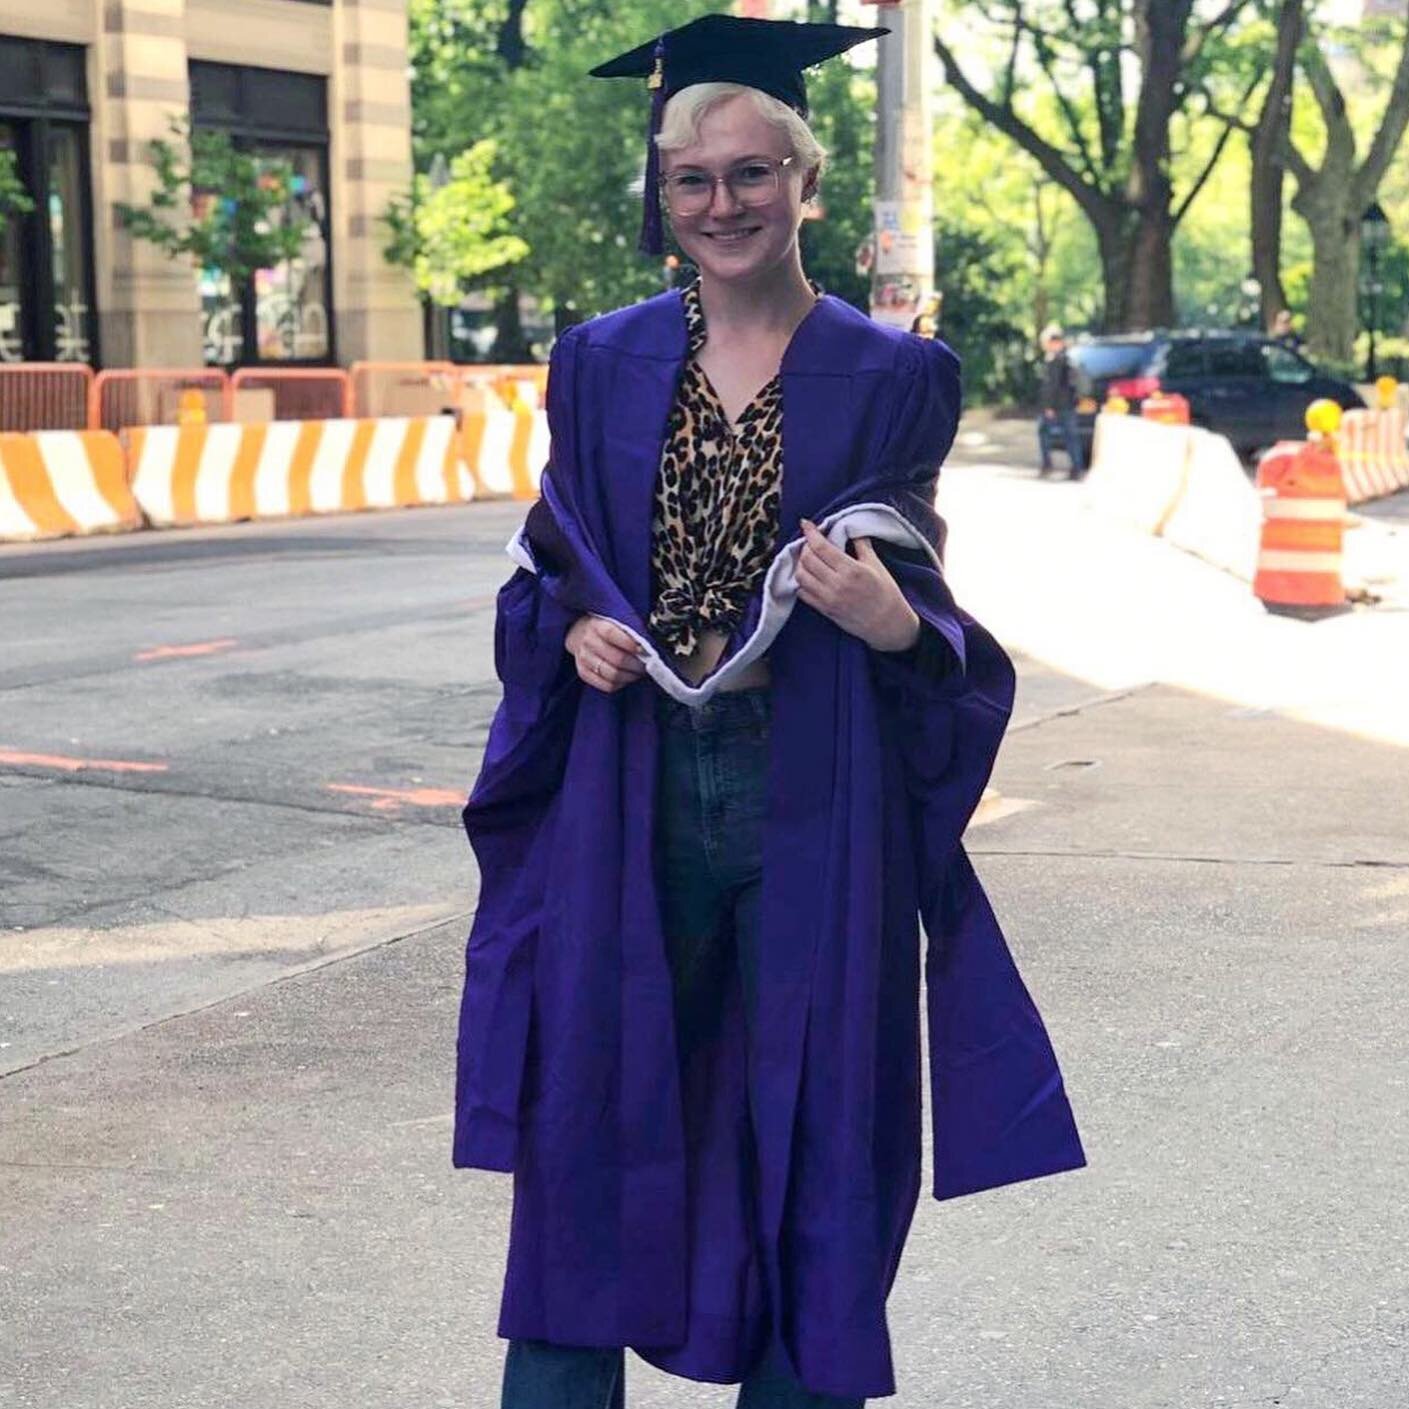 Exciting news from the lab&mdash;Lucy, our former social media manager &amp; scheduling director, just finished her MA and will soon start work at the Bronx Mental Health Court. Say hi to Andi, a recent BS alumna, who will be taking over her responsi